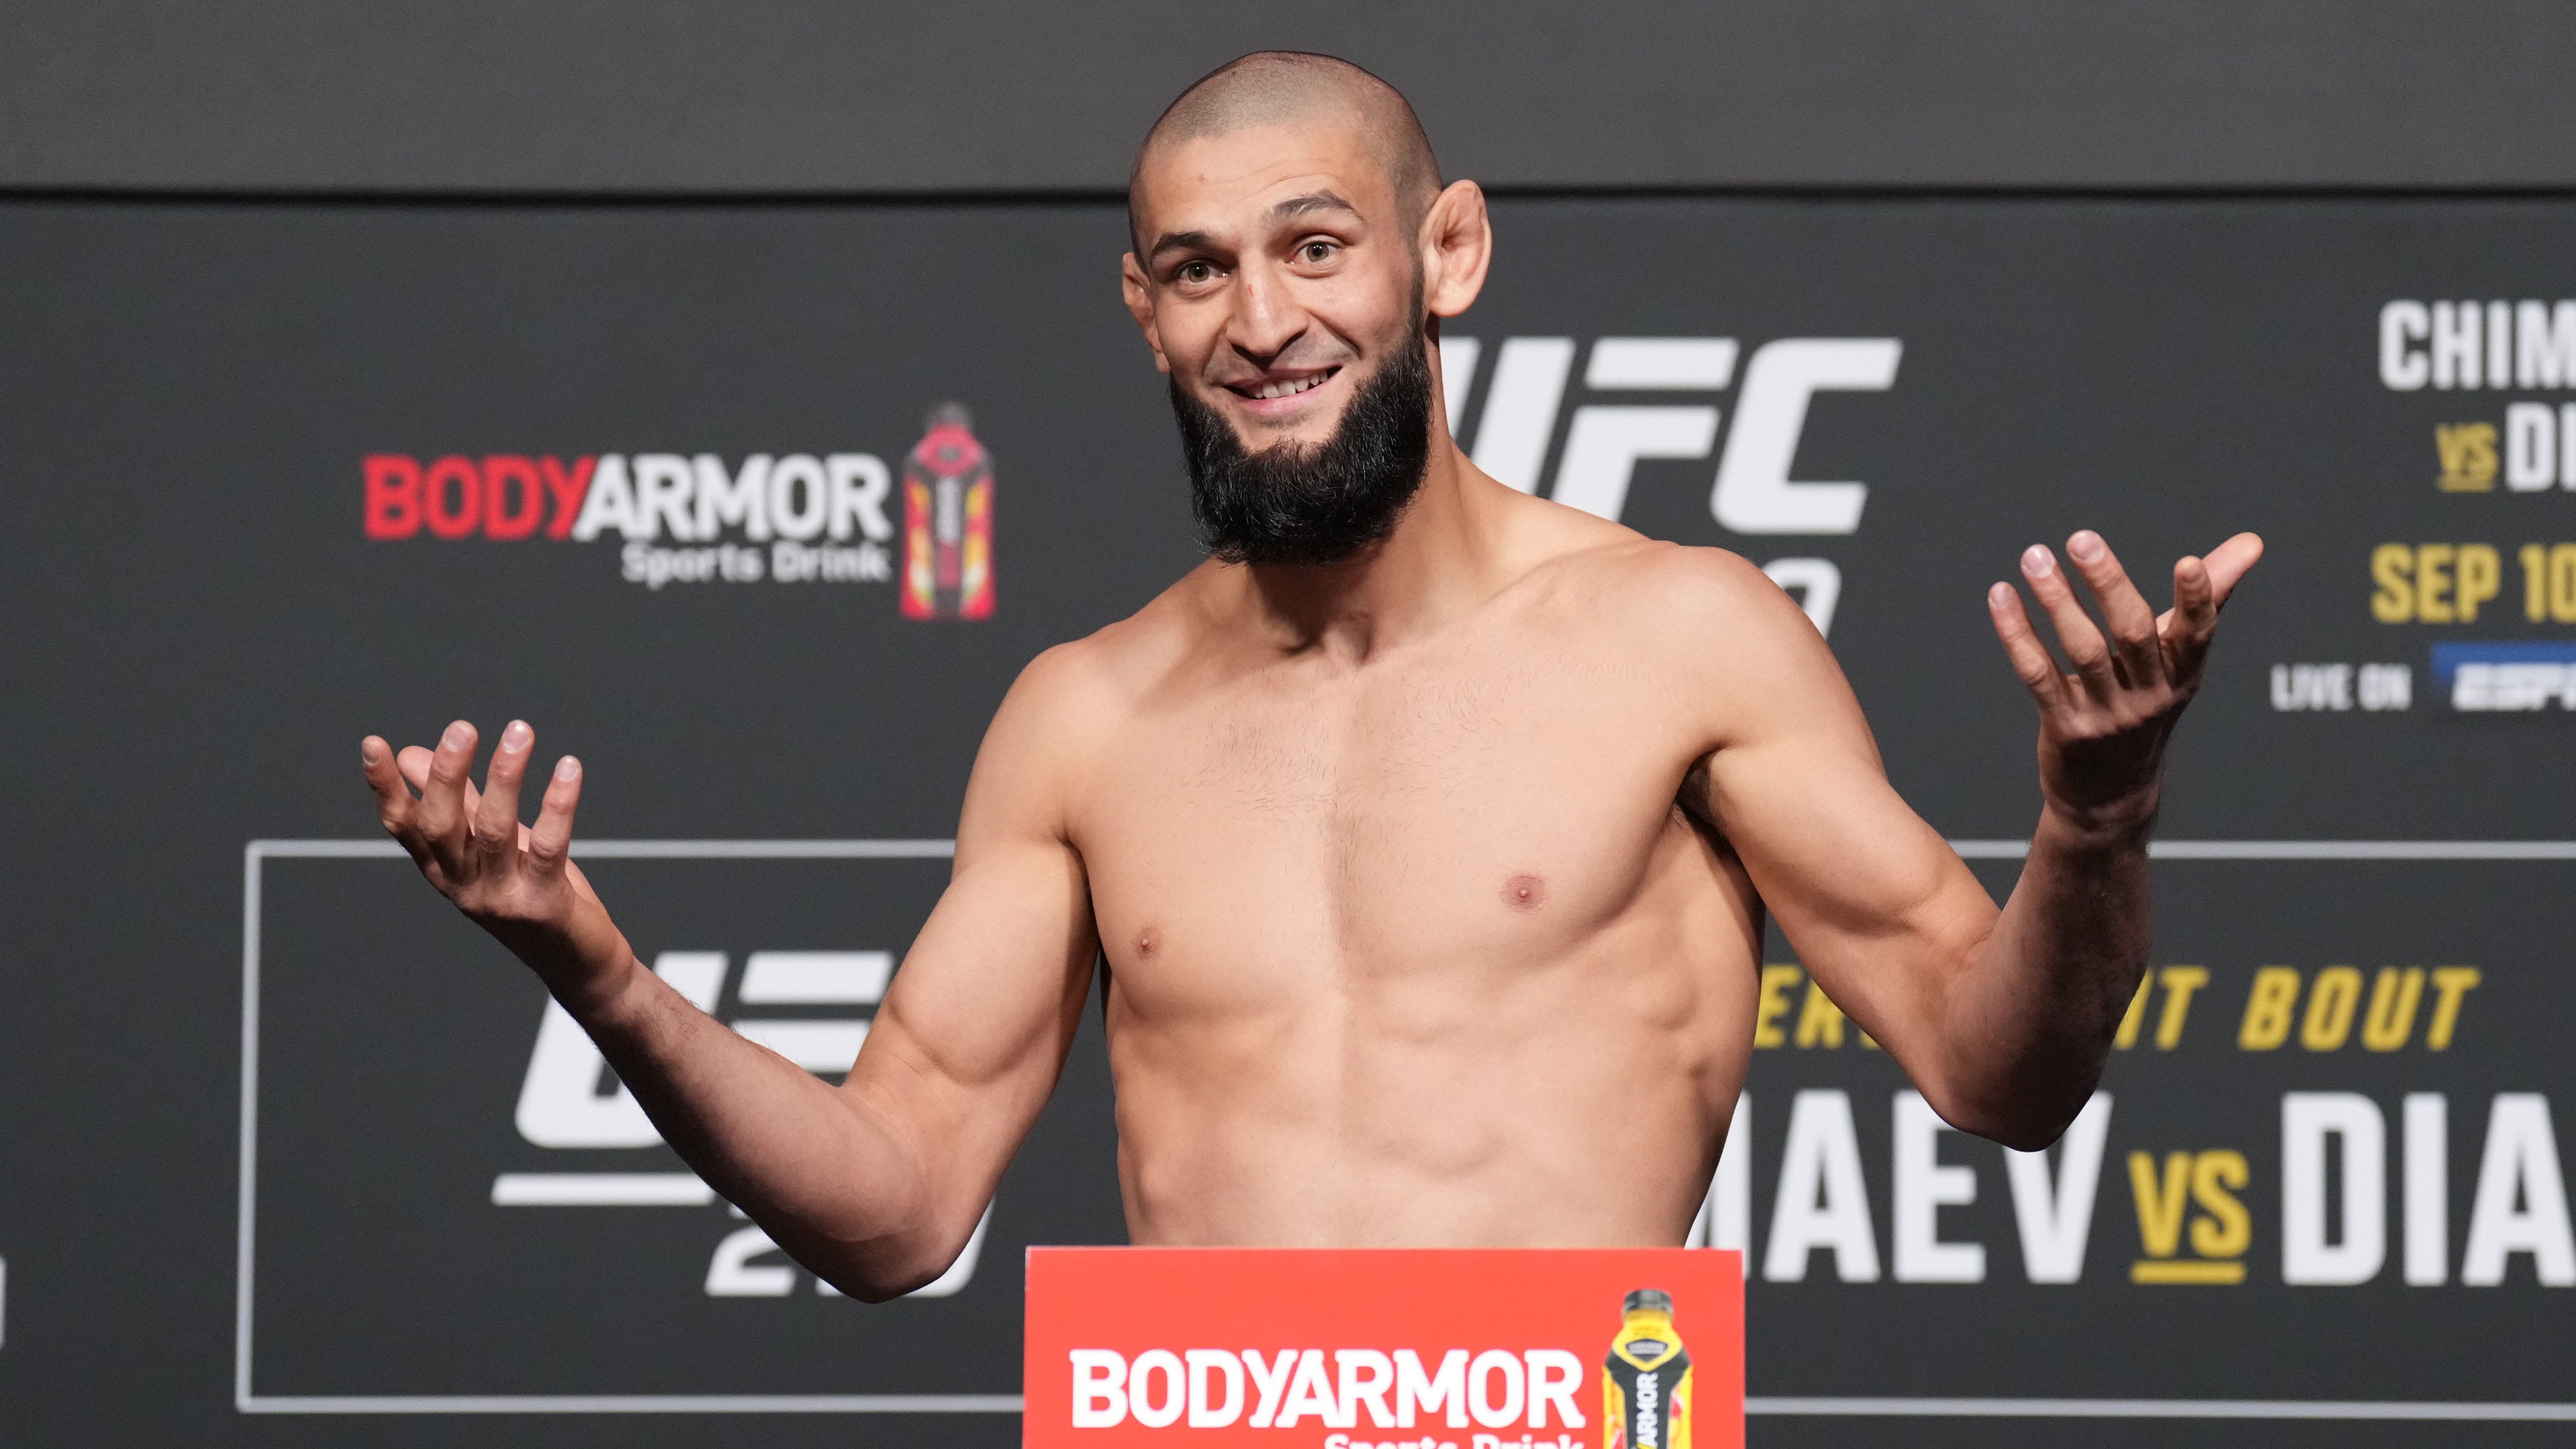 UFC 279: Khamzat Chimaev comes in overweight, puts fight with Nate Diaz in jeopardy